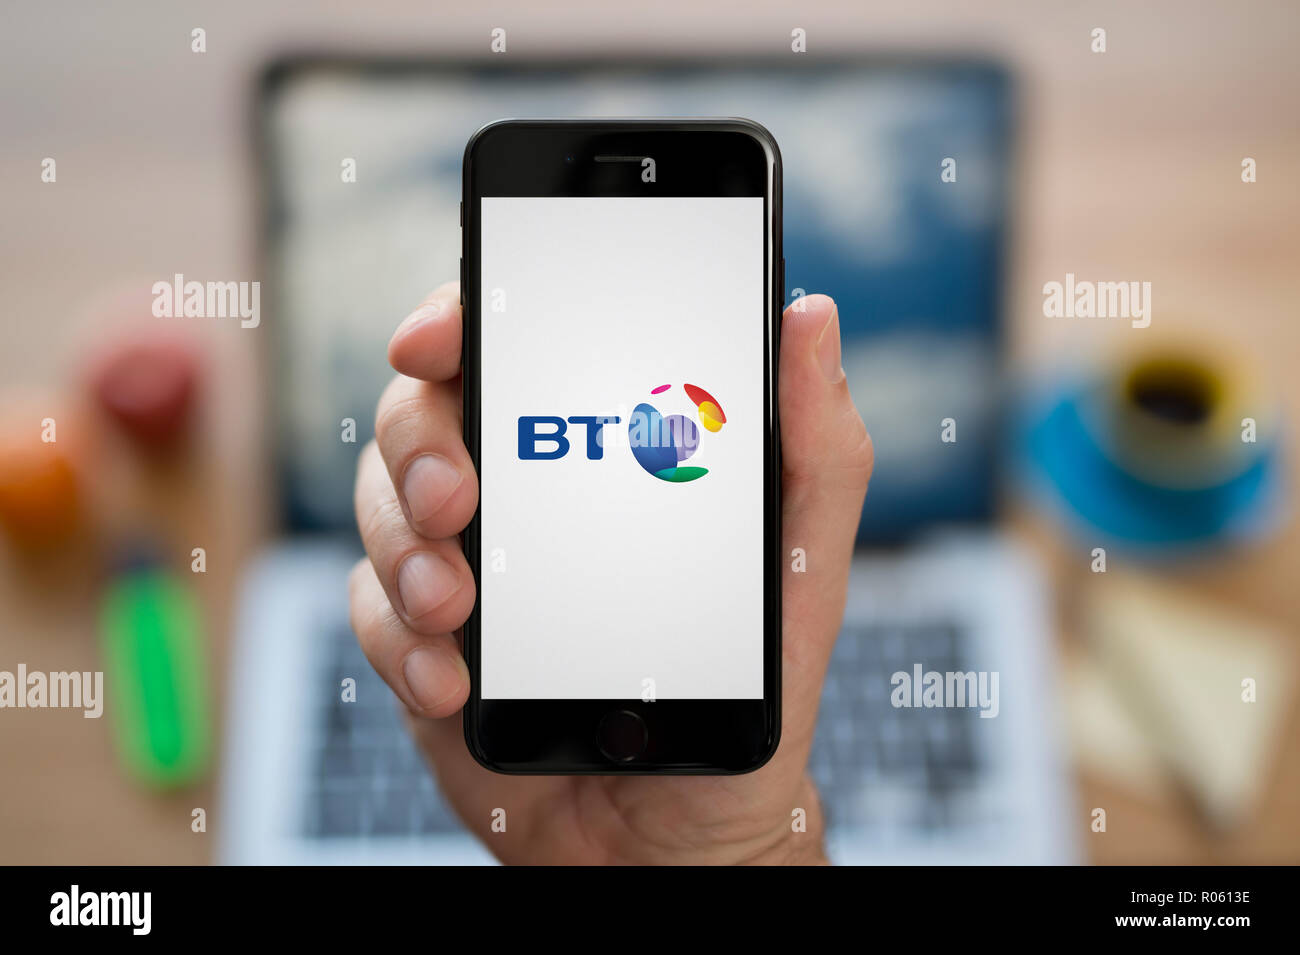 A man looks at his iPhone which displays the BT logo, while sat at his computer desk (Editorial use only). Stock Photo